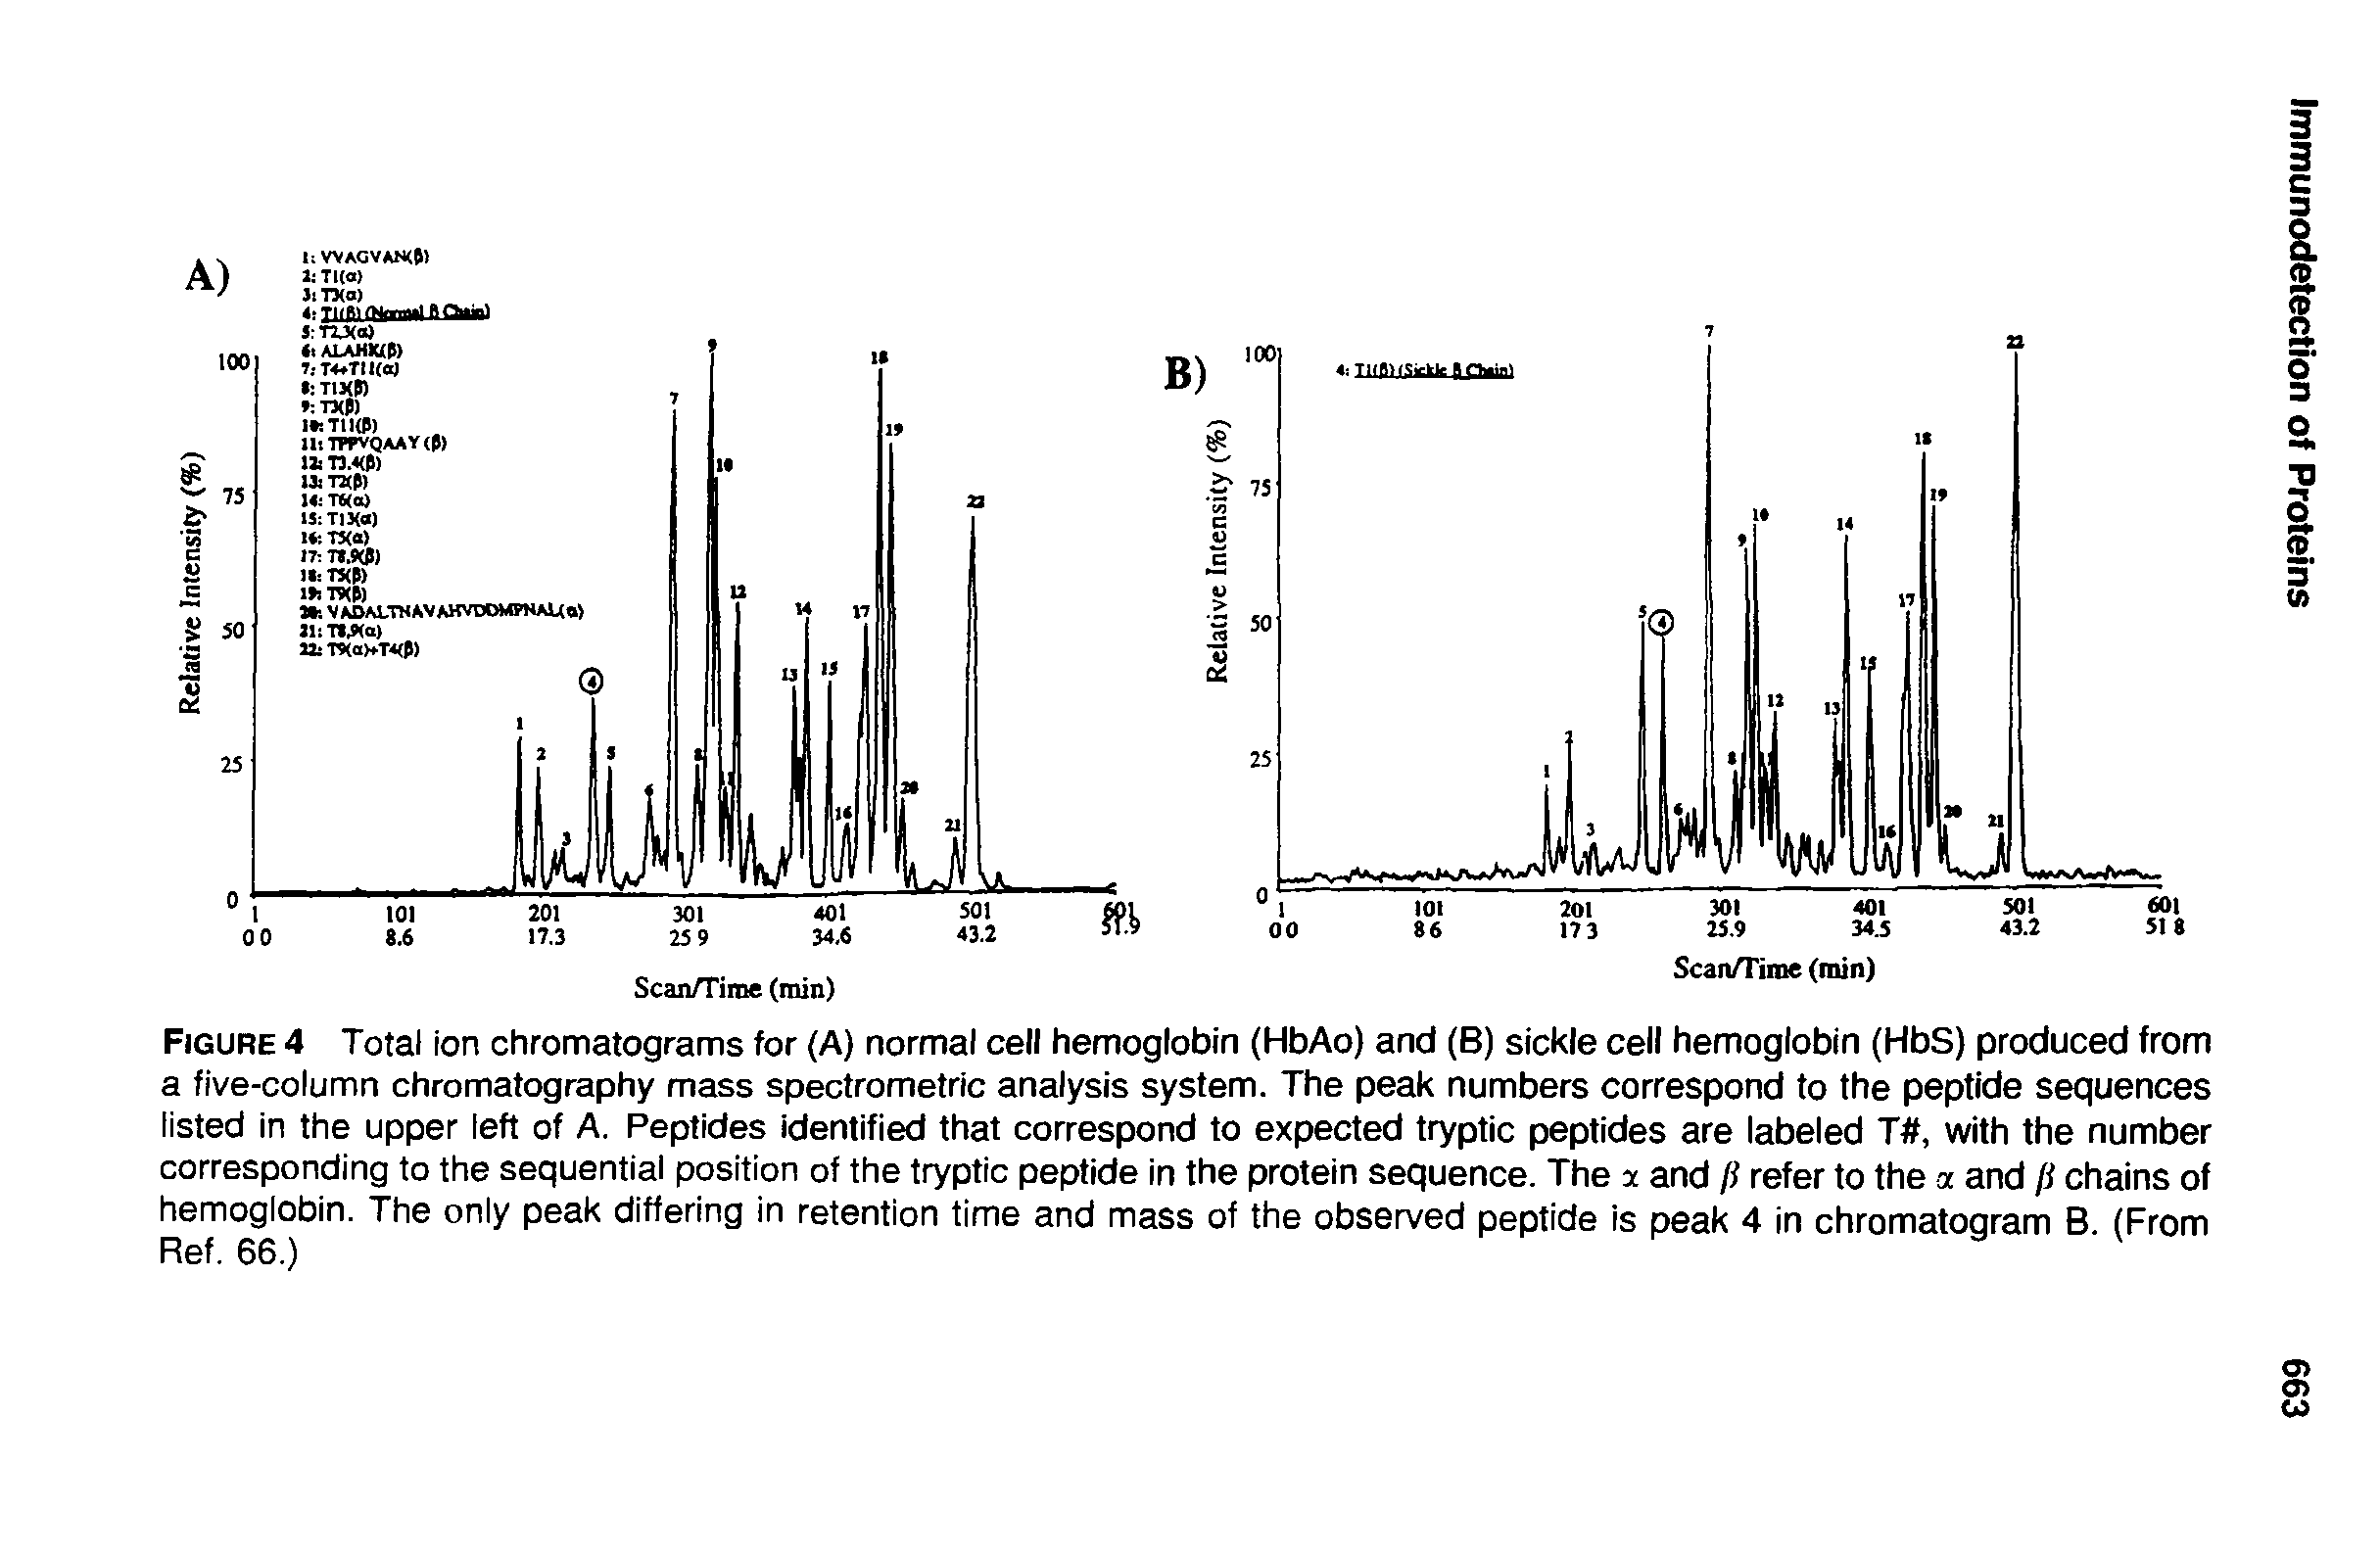 Figure 4 Total ion chromatograms for (A) normal cell hemoglobin (HbAo) and (B) sickle cell hemoglobin (HbS) produced from a five-column chromatography mass spectrometric analysis system. The peak numbers correspond to the peptide sequences listed in the upper left of A. Peptides identified that correspond to expected tryptic peptides are labeled T, with the number corresponding to the sequential position of the tryptic peptide in the protein sequence. The x and [i refer to the a and /i chains of hemoglobin. The oniy peak differing in retention time and mass of the observed peptide is peak 4 in chromatogram B. (From Ref. 66.)...